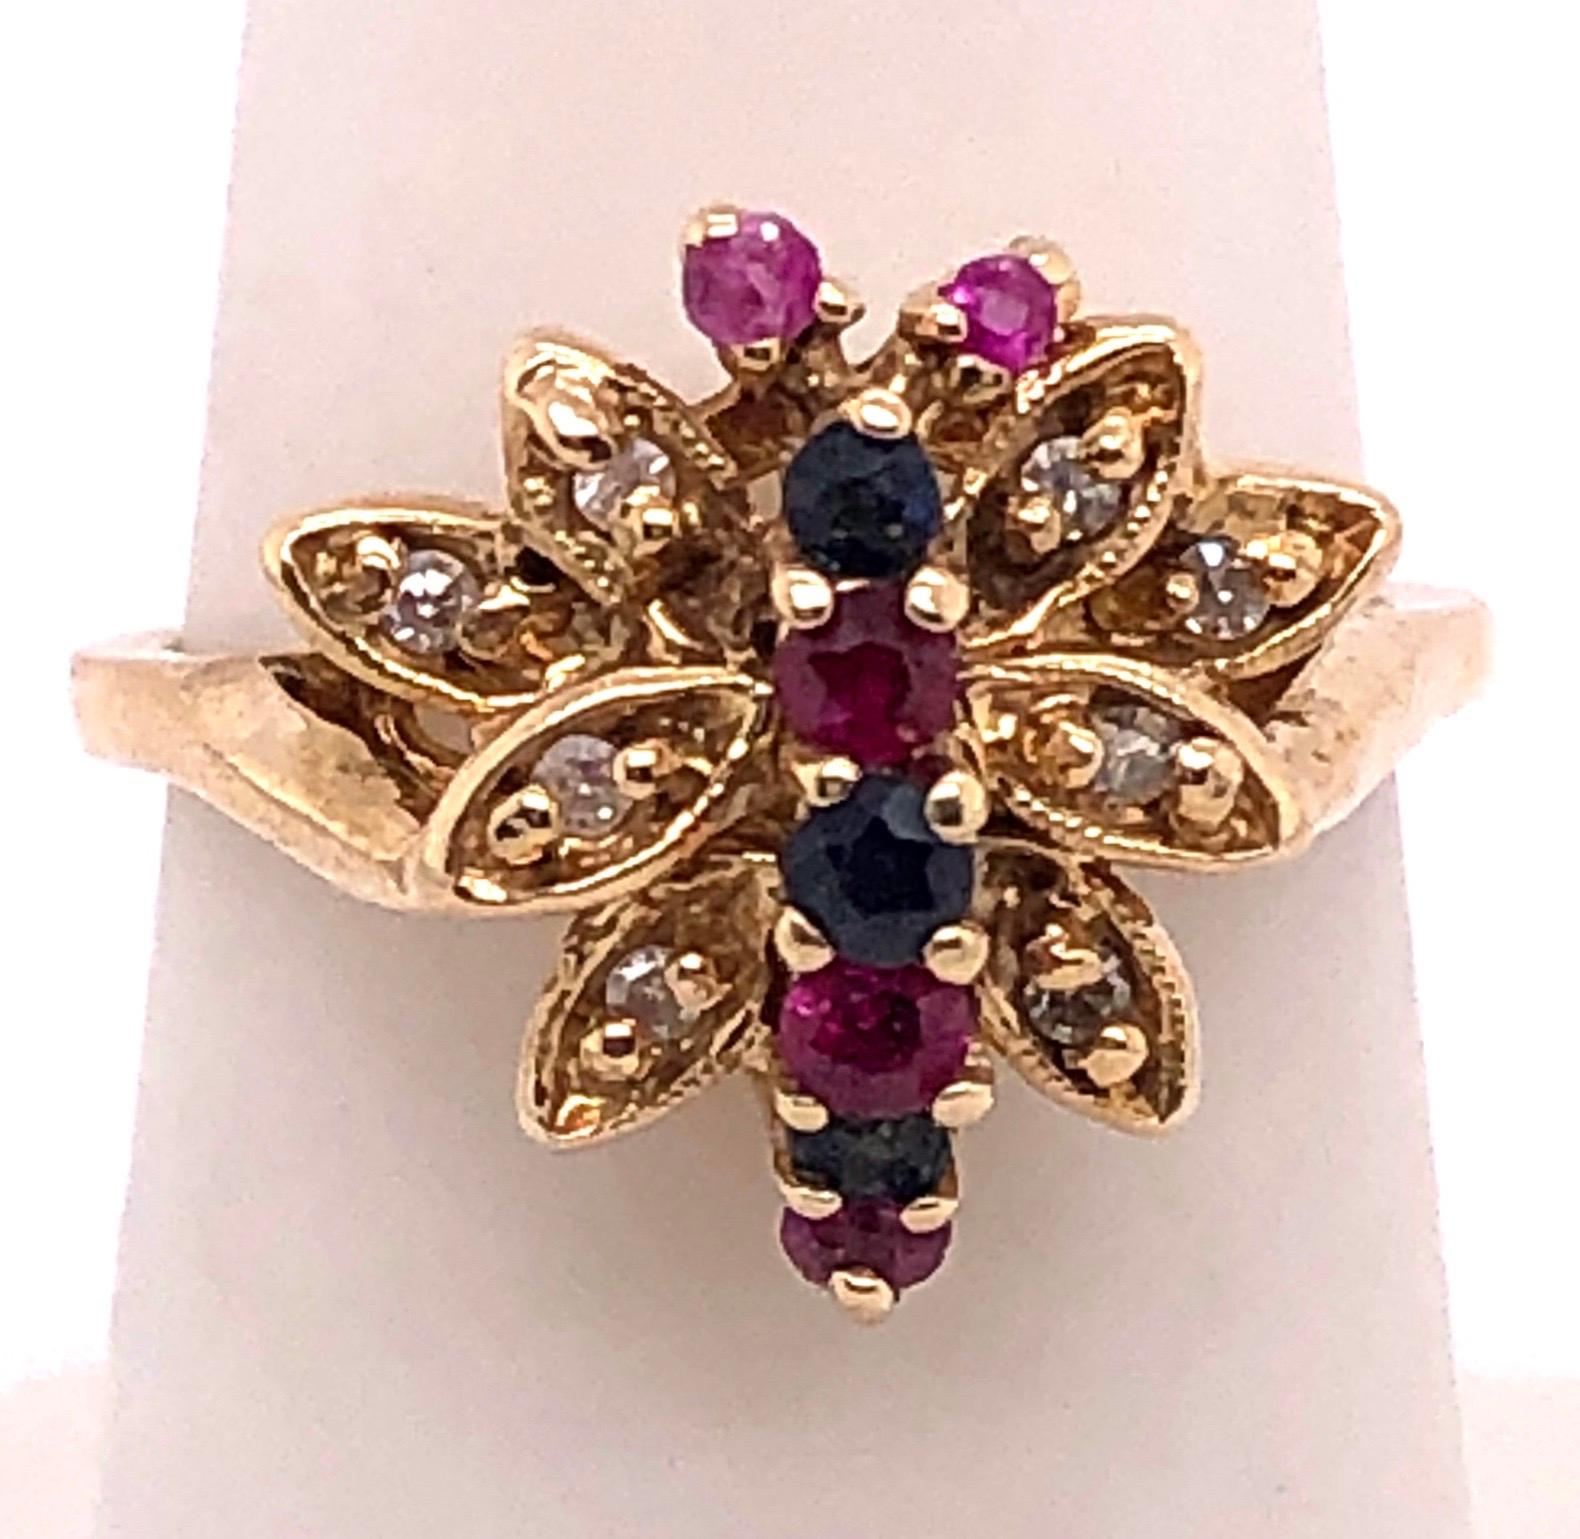 14 Karat Yellow Gold Fashion Ring with Sapphire Ruby and Diamonds.
0.08 Total Diamond Weight
5 Round Ruby
3 Round sapphire
Size 6.5
4 grams total weight.
